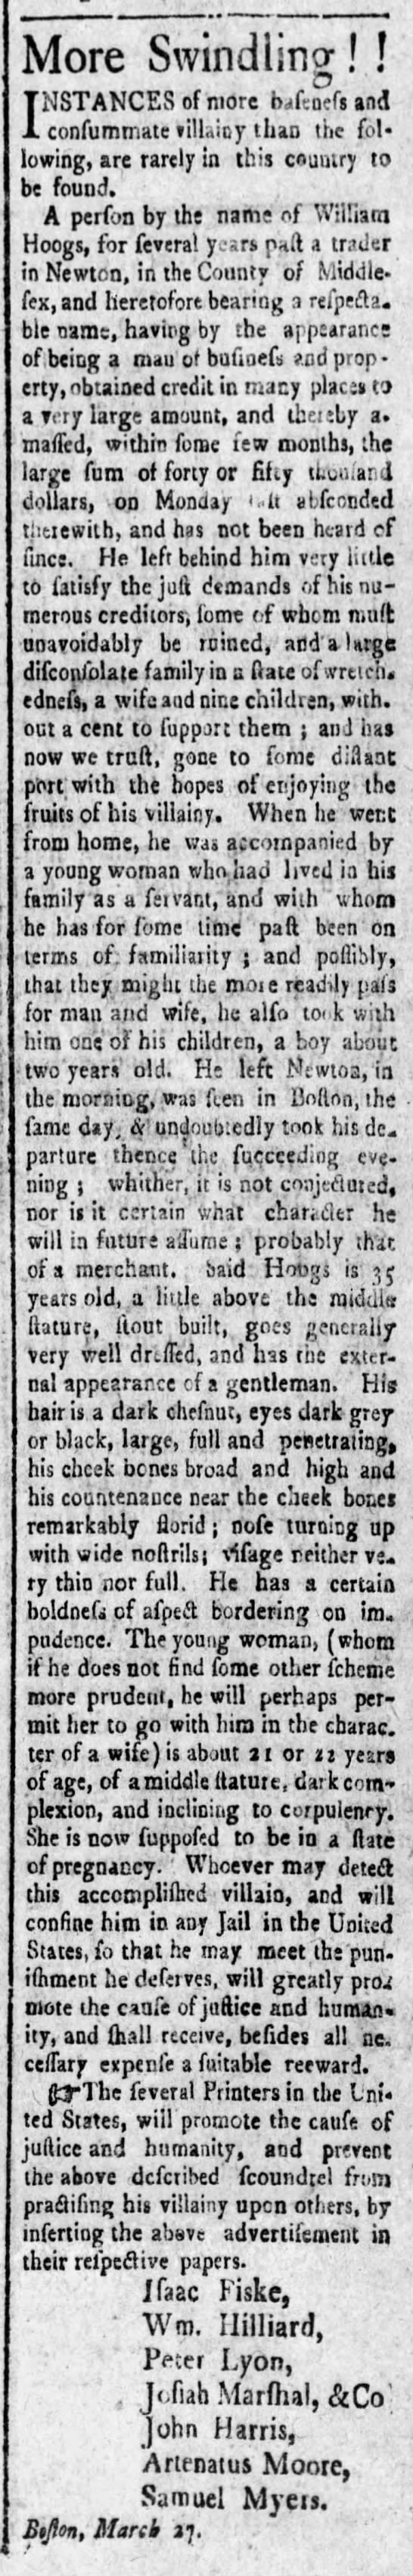 William Hoogs, swindler, fled from Boston with woman and 2 year boy, March 1810 - 